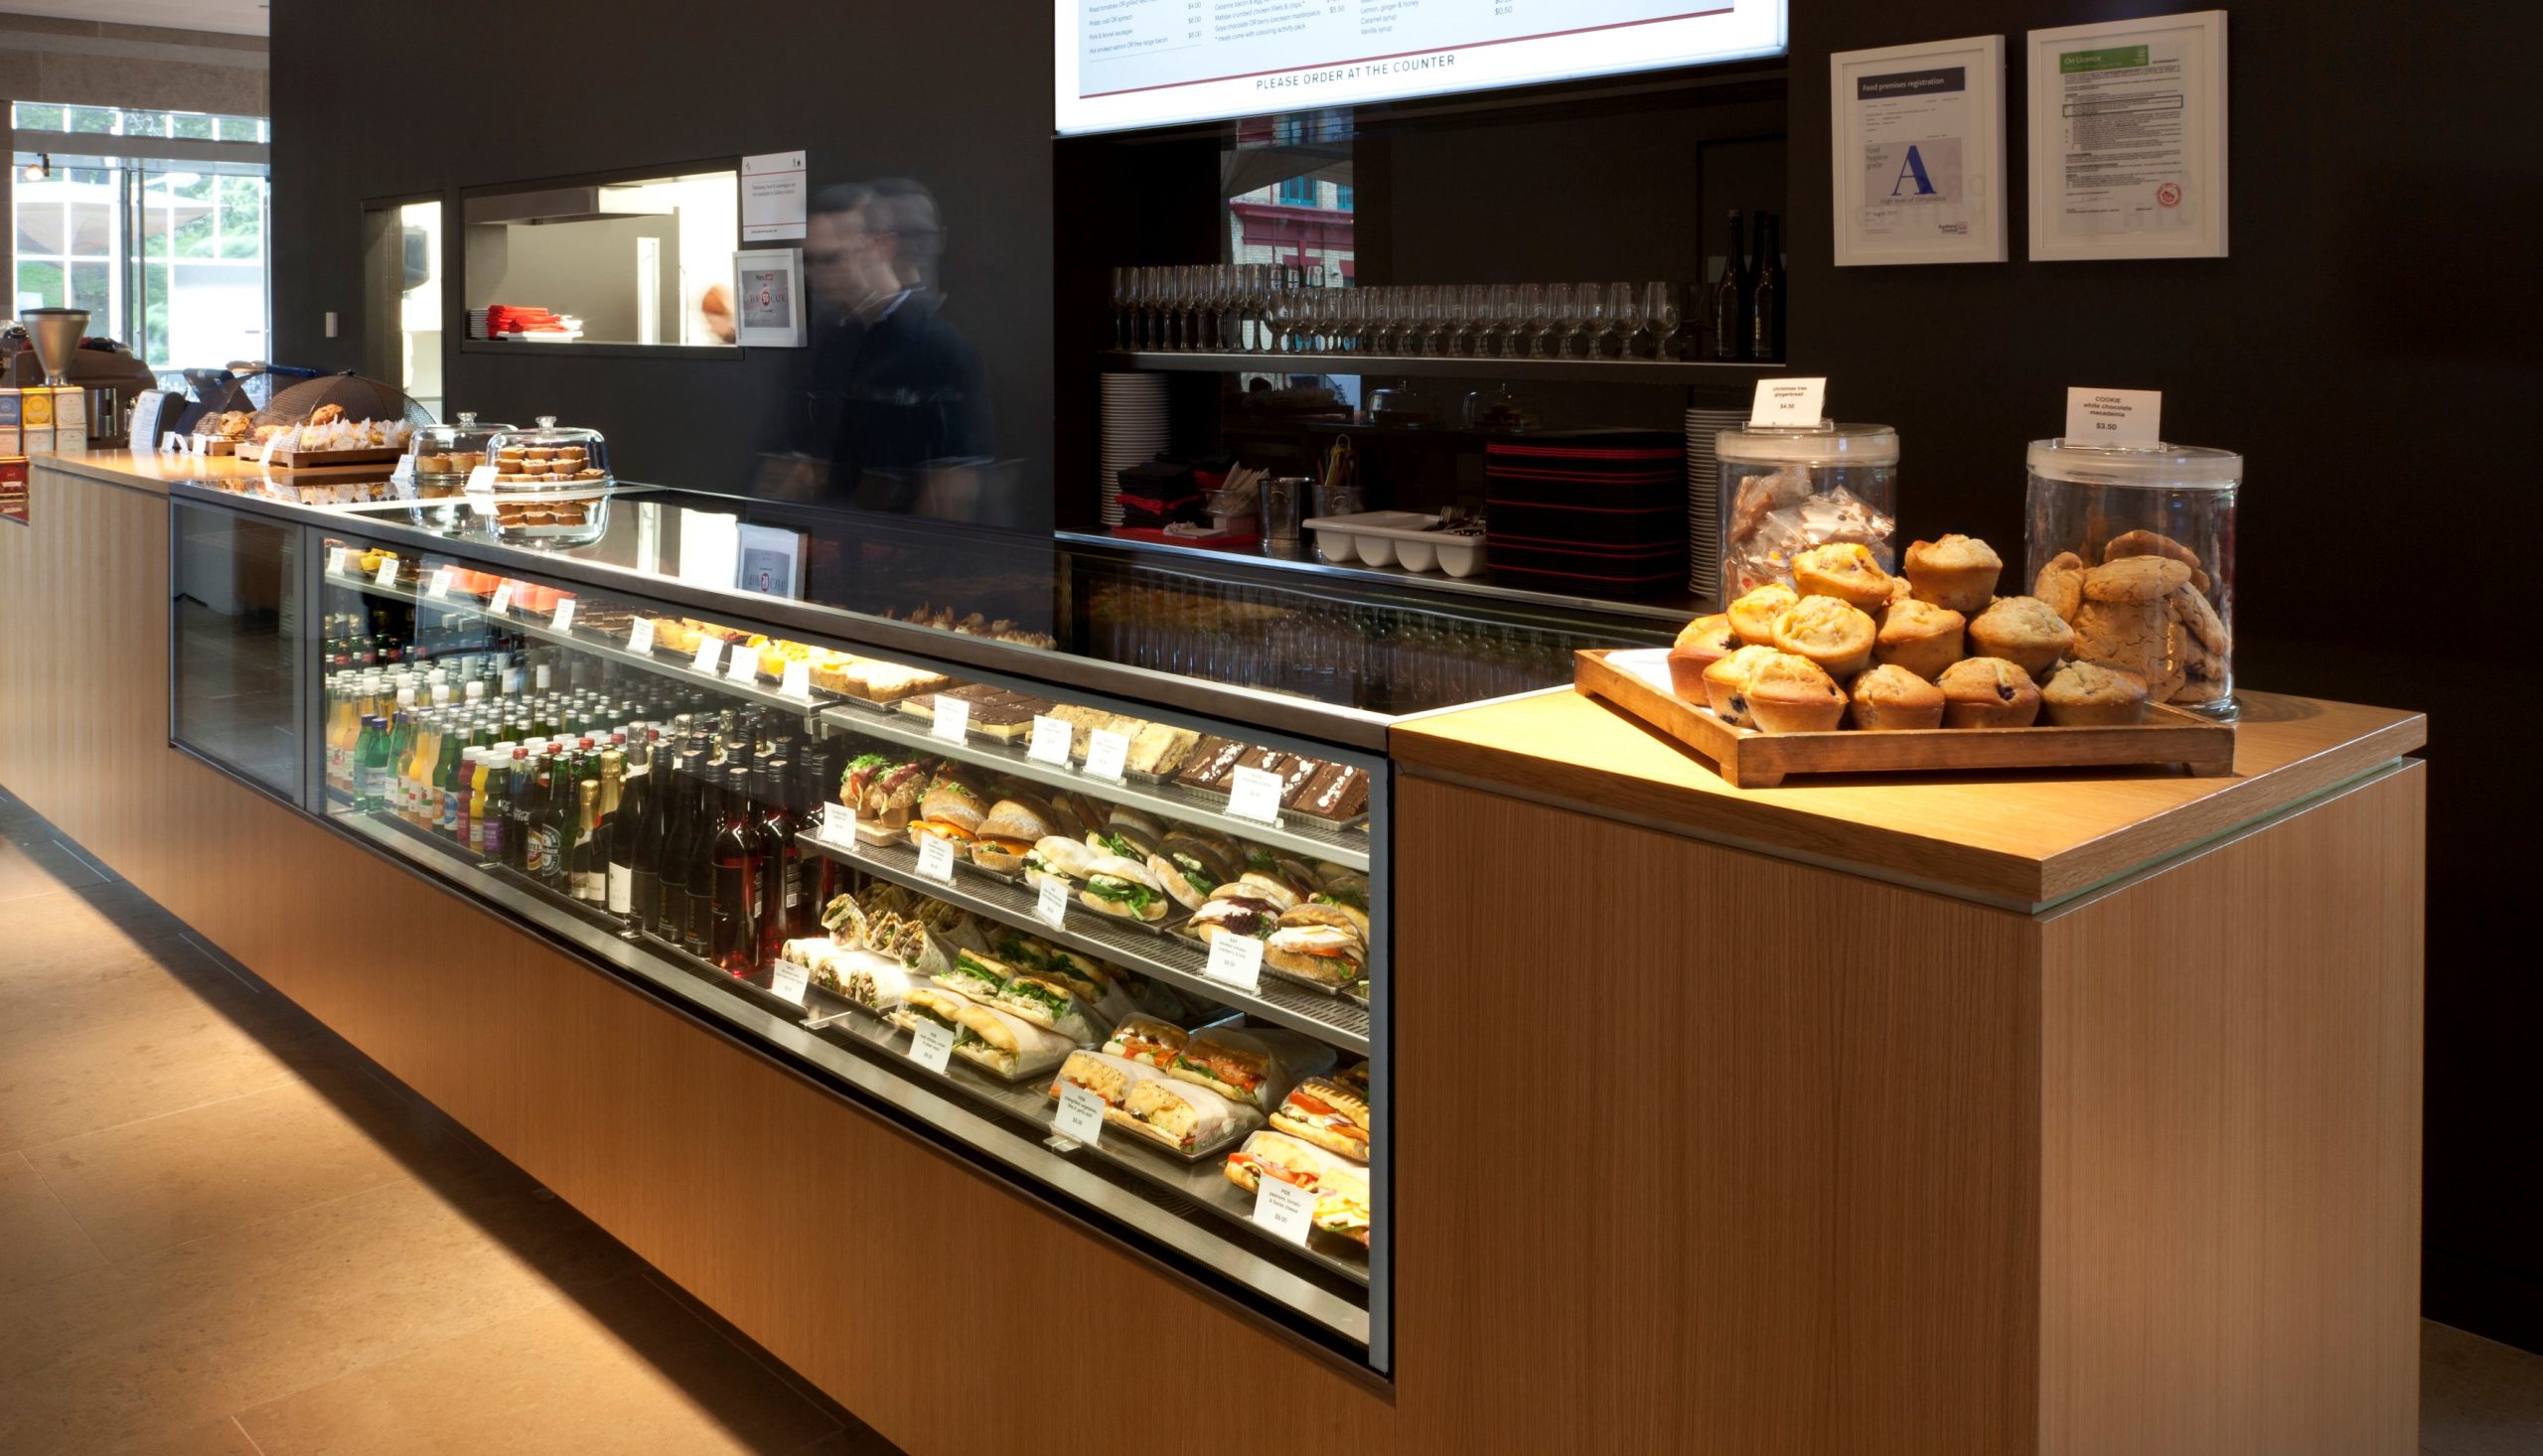 Smart display cabinetry that allows displayed foods to simply stand out